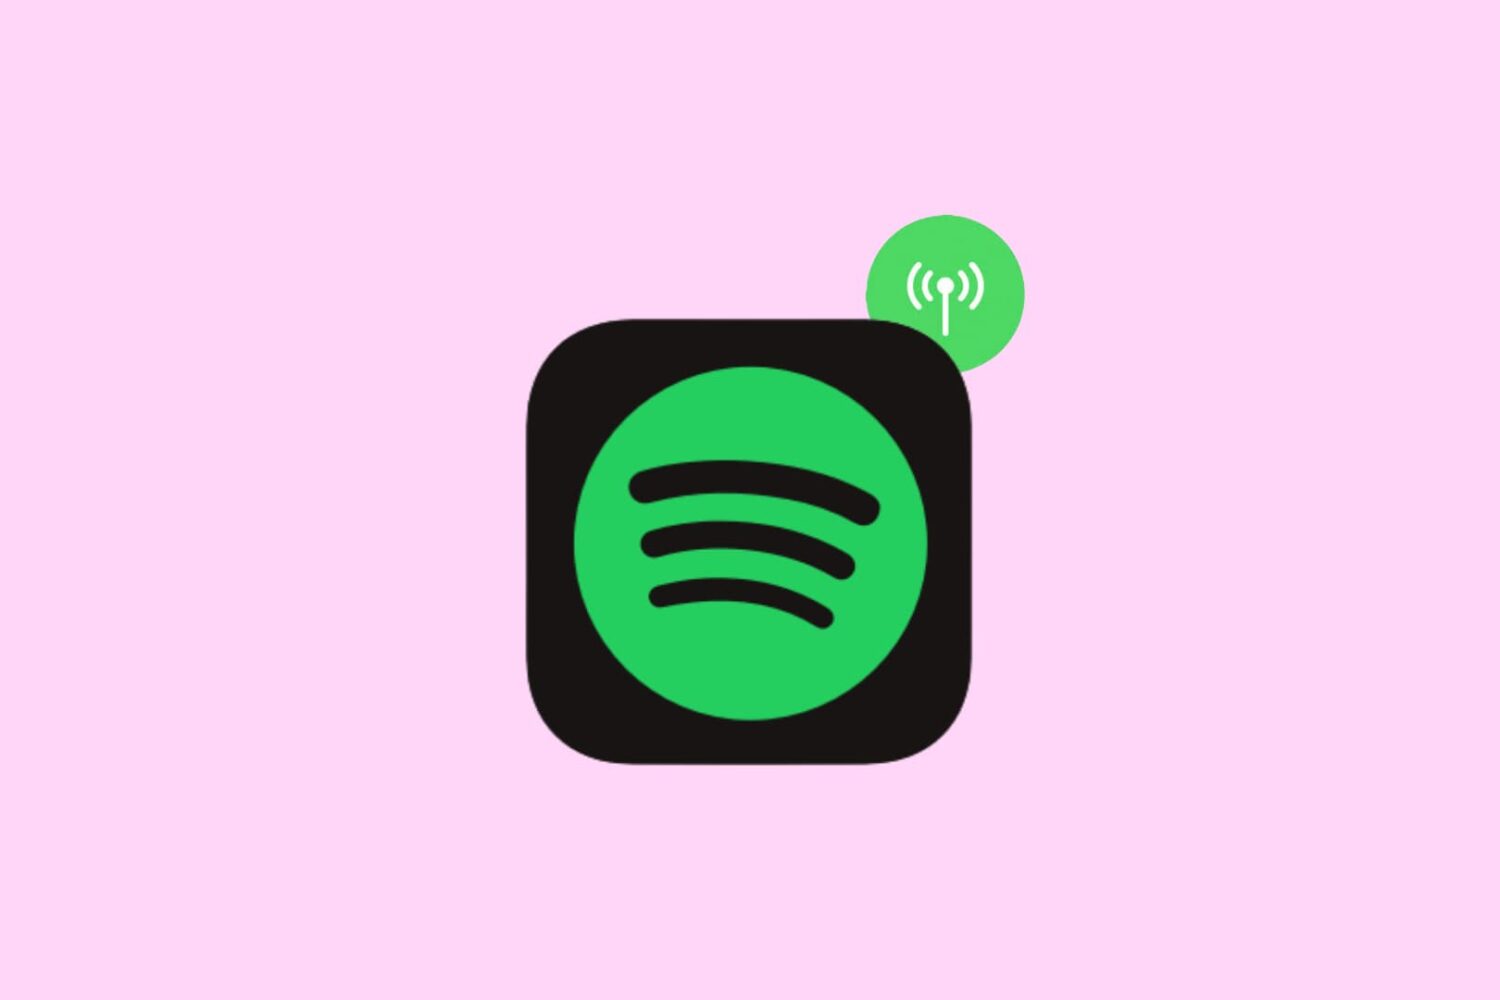 Spotify app icon with green cellular icon